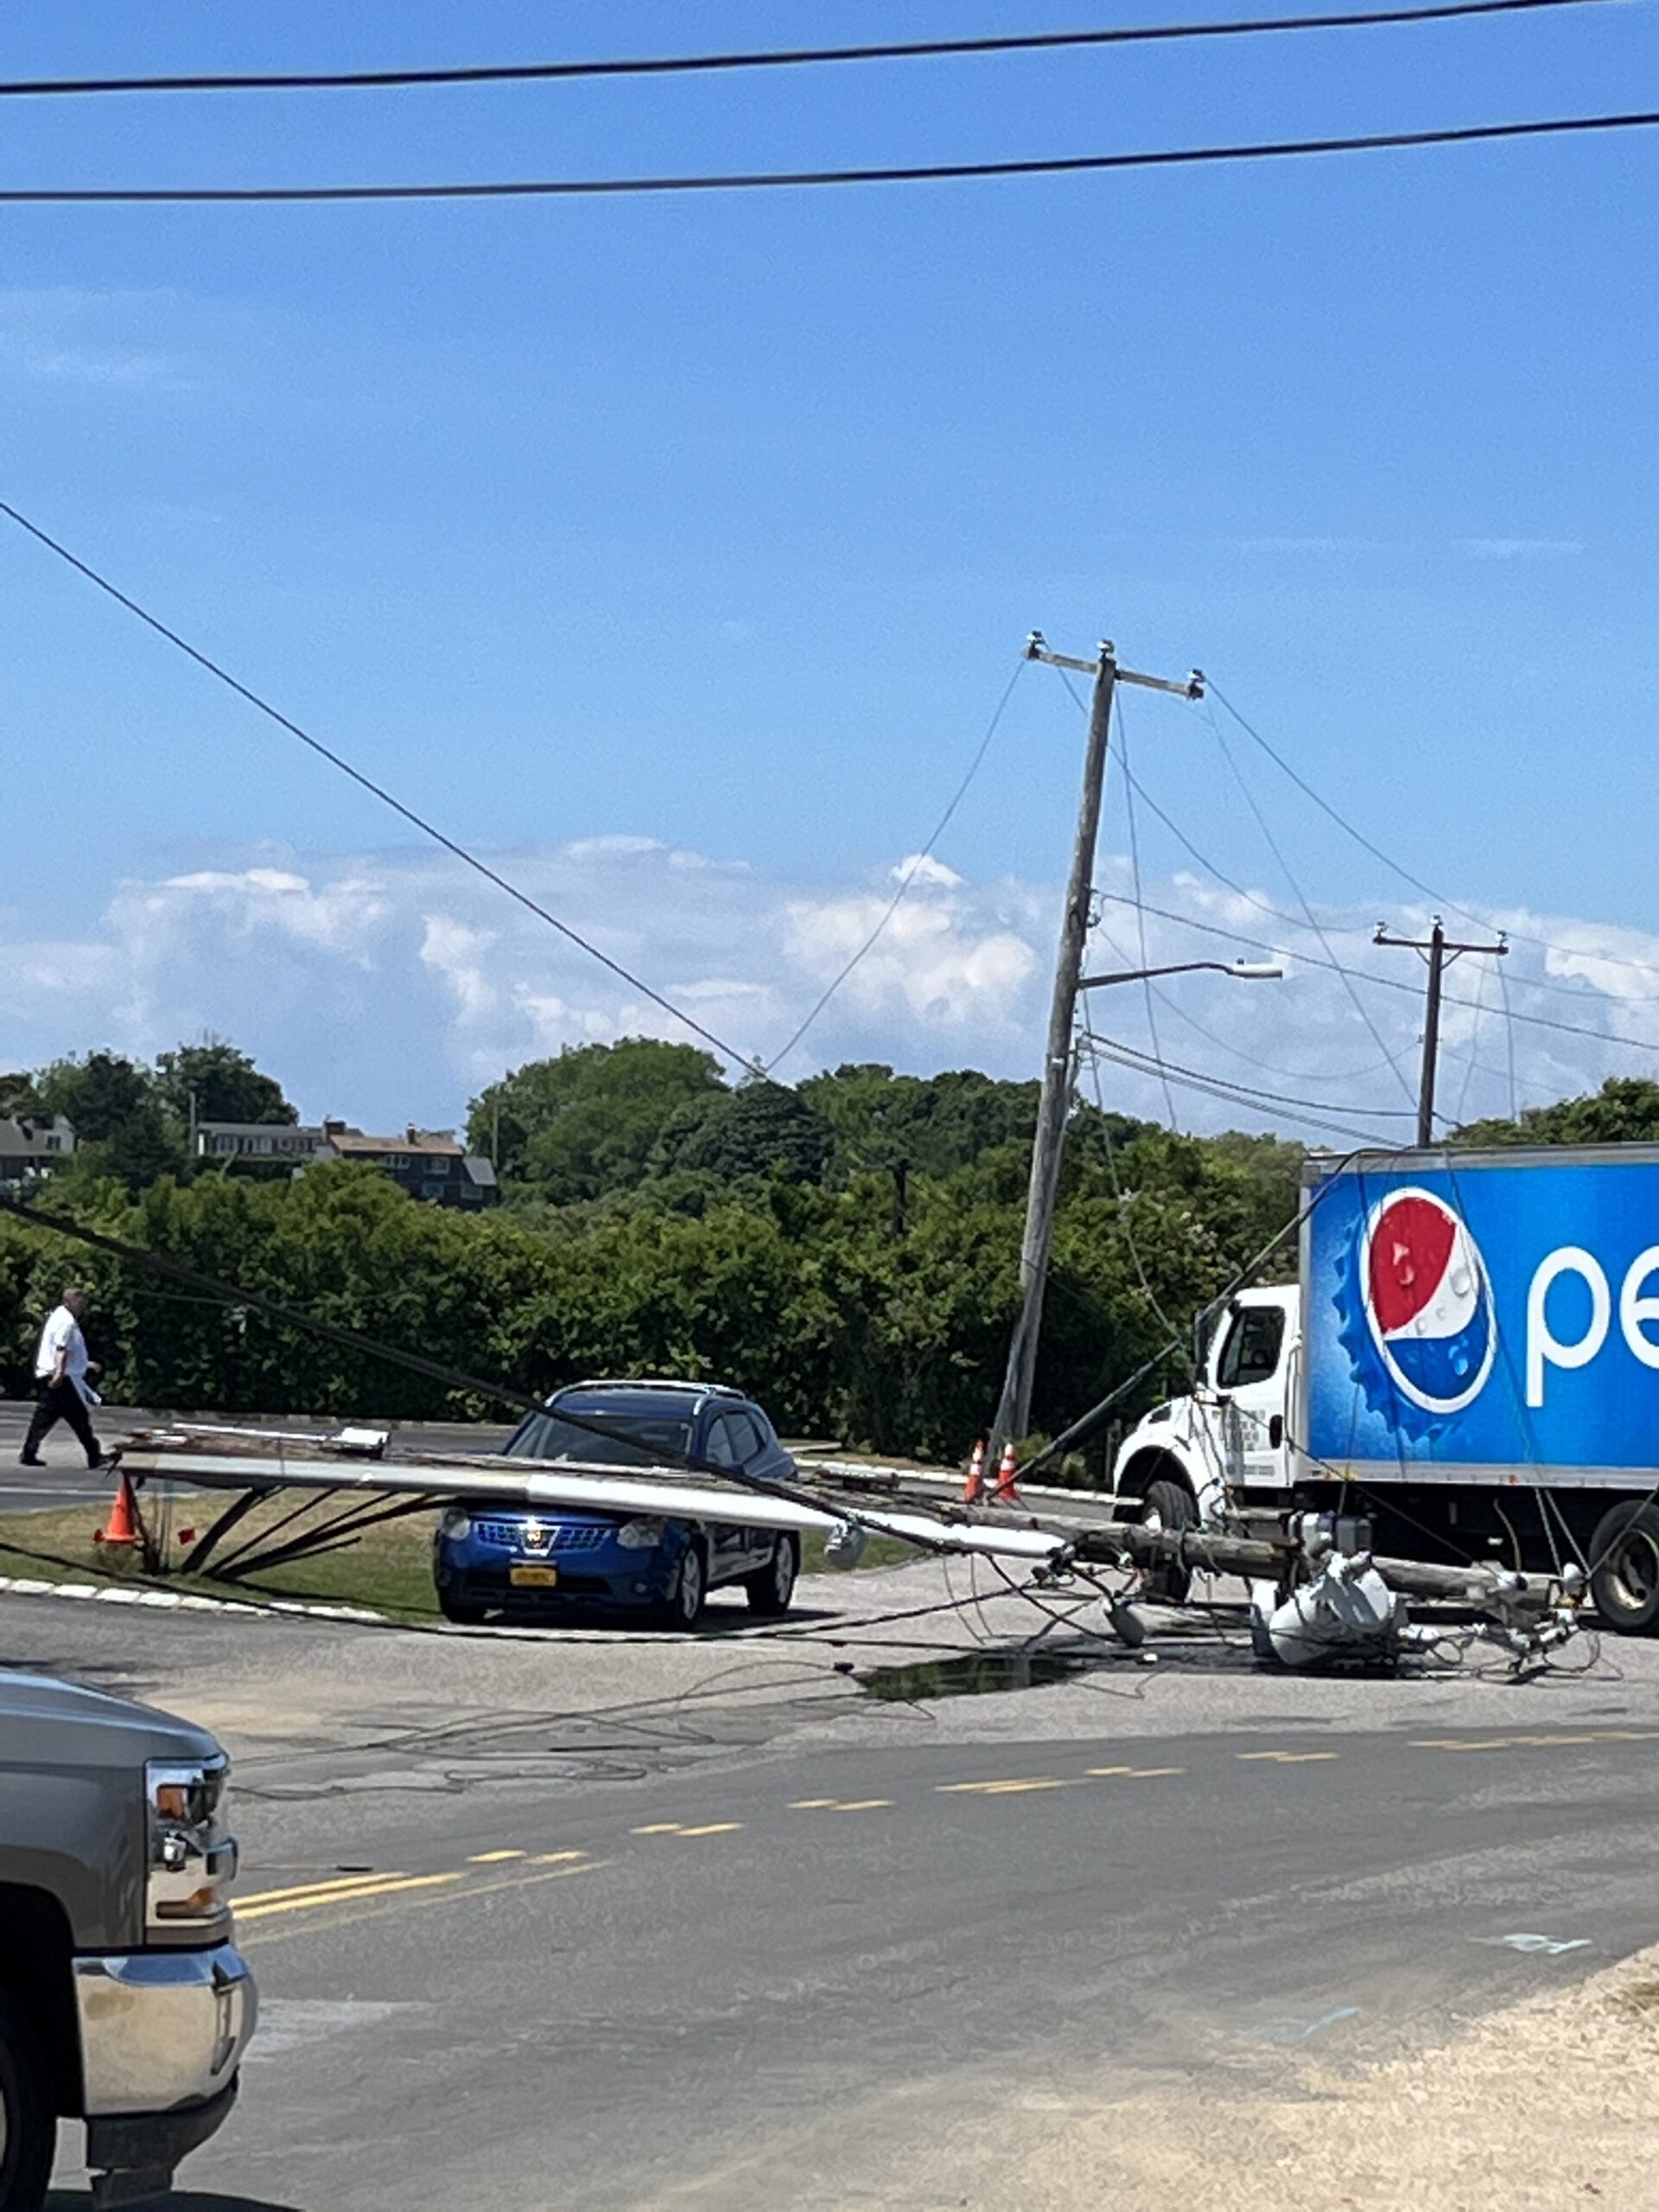 The crash on Emery Street took down power lines, leaving much of downtown Montauk without electricity.